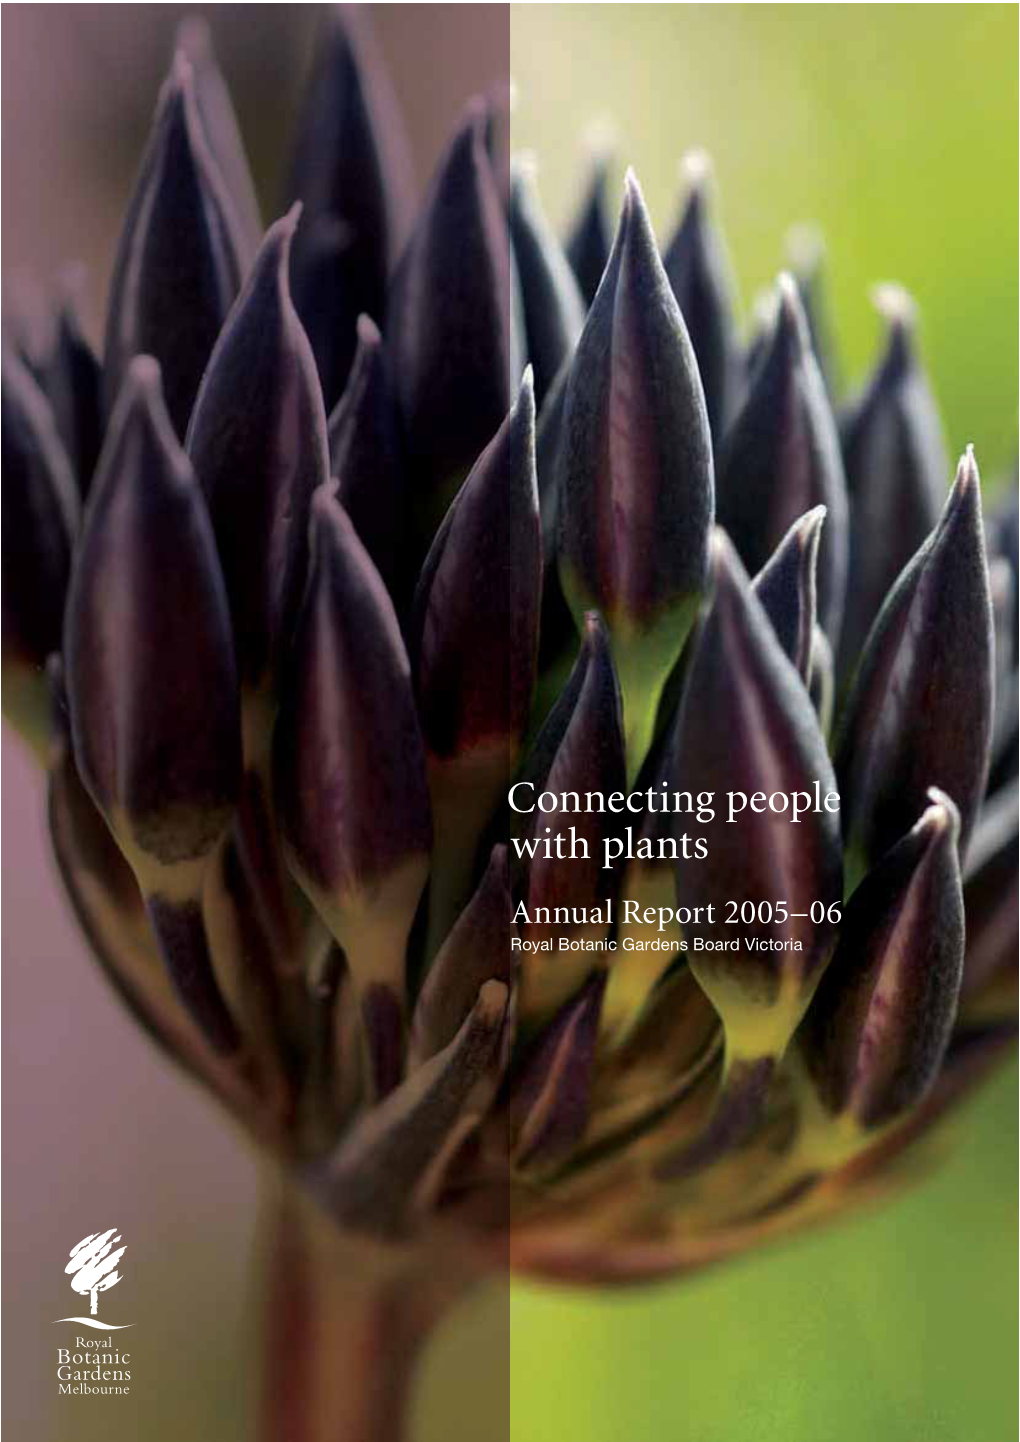 Connecting People with Plants Annual Report 2005–06 Royal Botanic Gardens Board Victoria